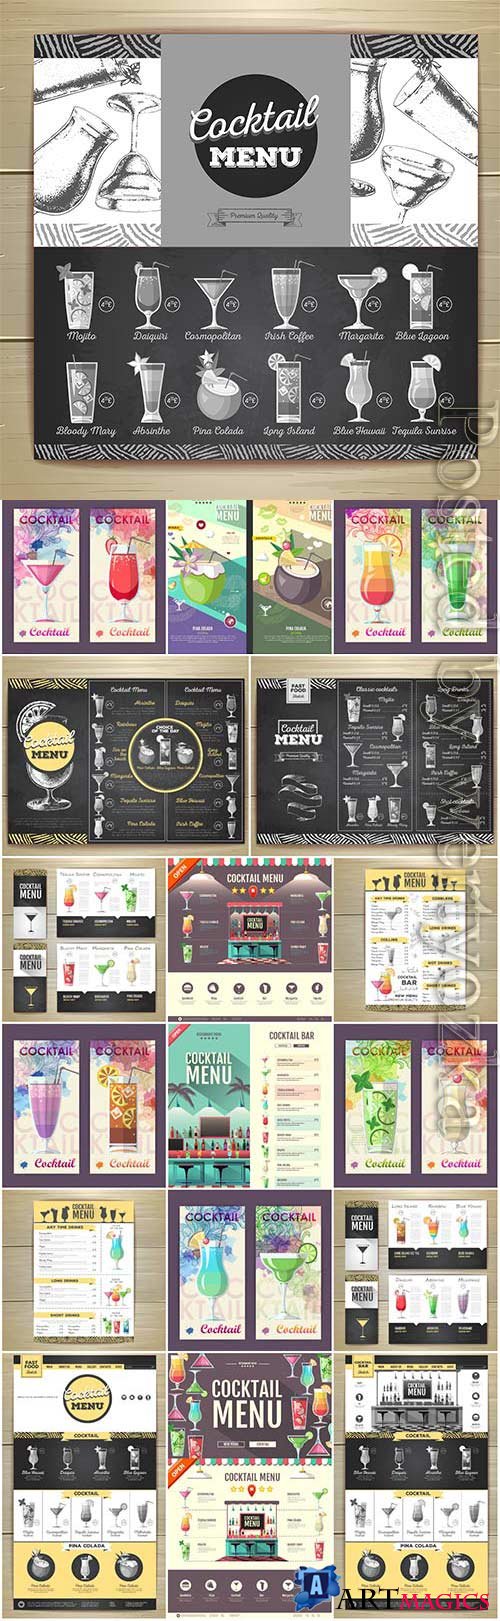 Cocktails menu for the bar in vector